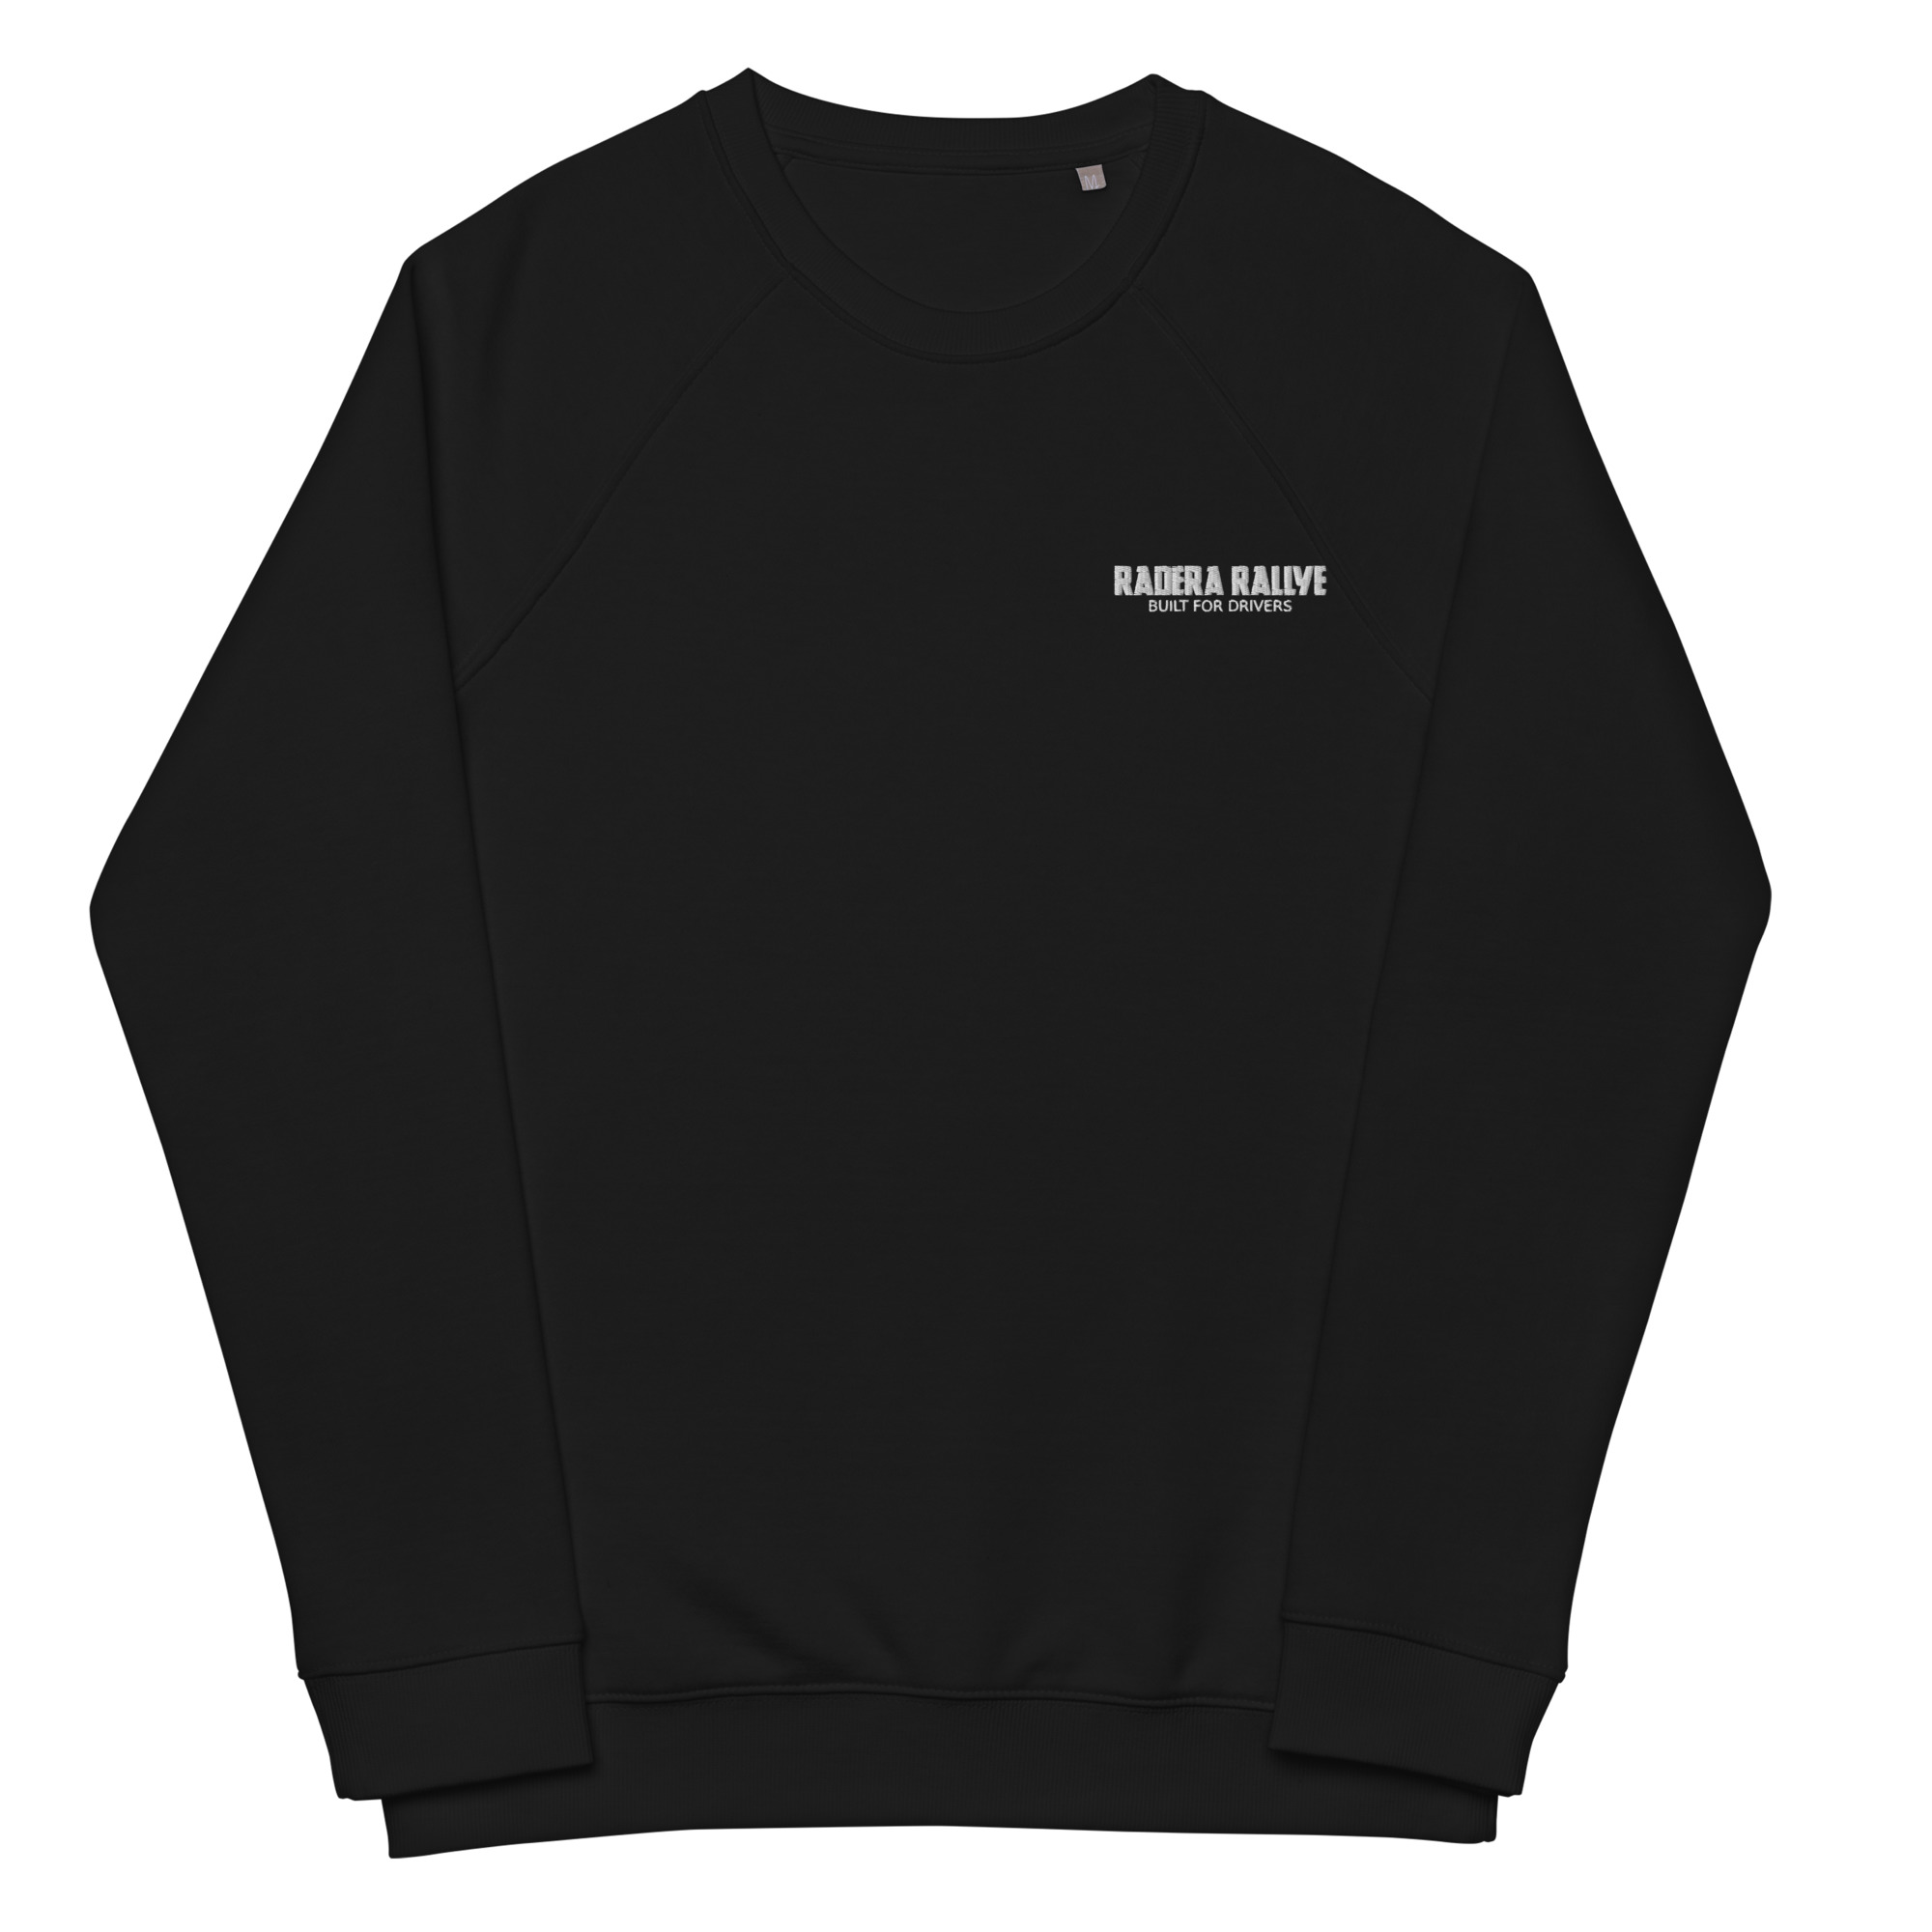 Built for drivers logo sweater